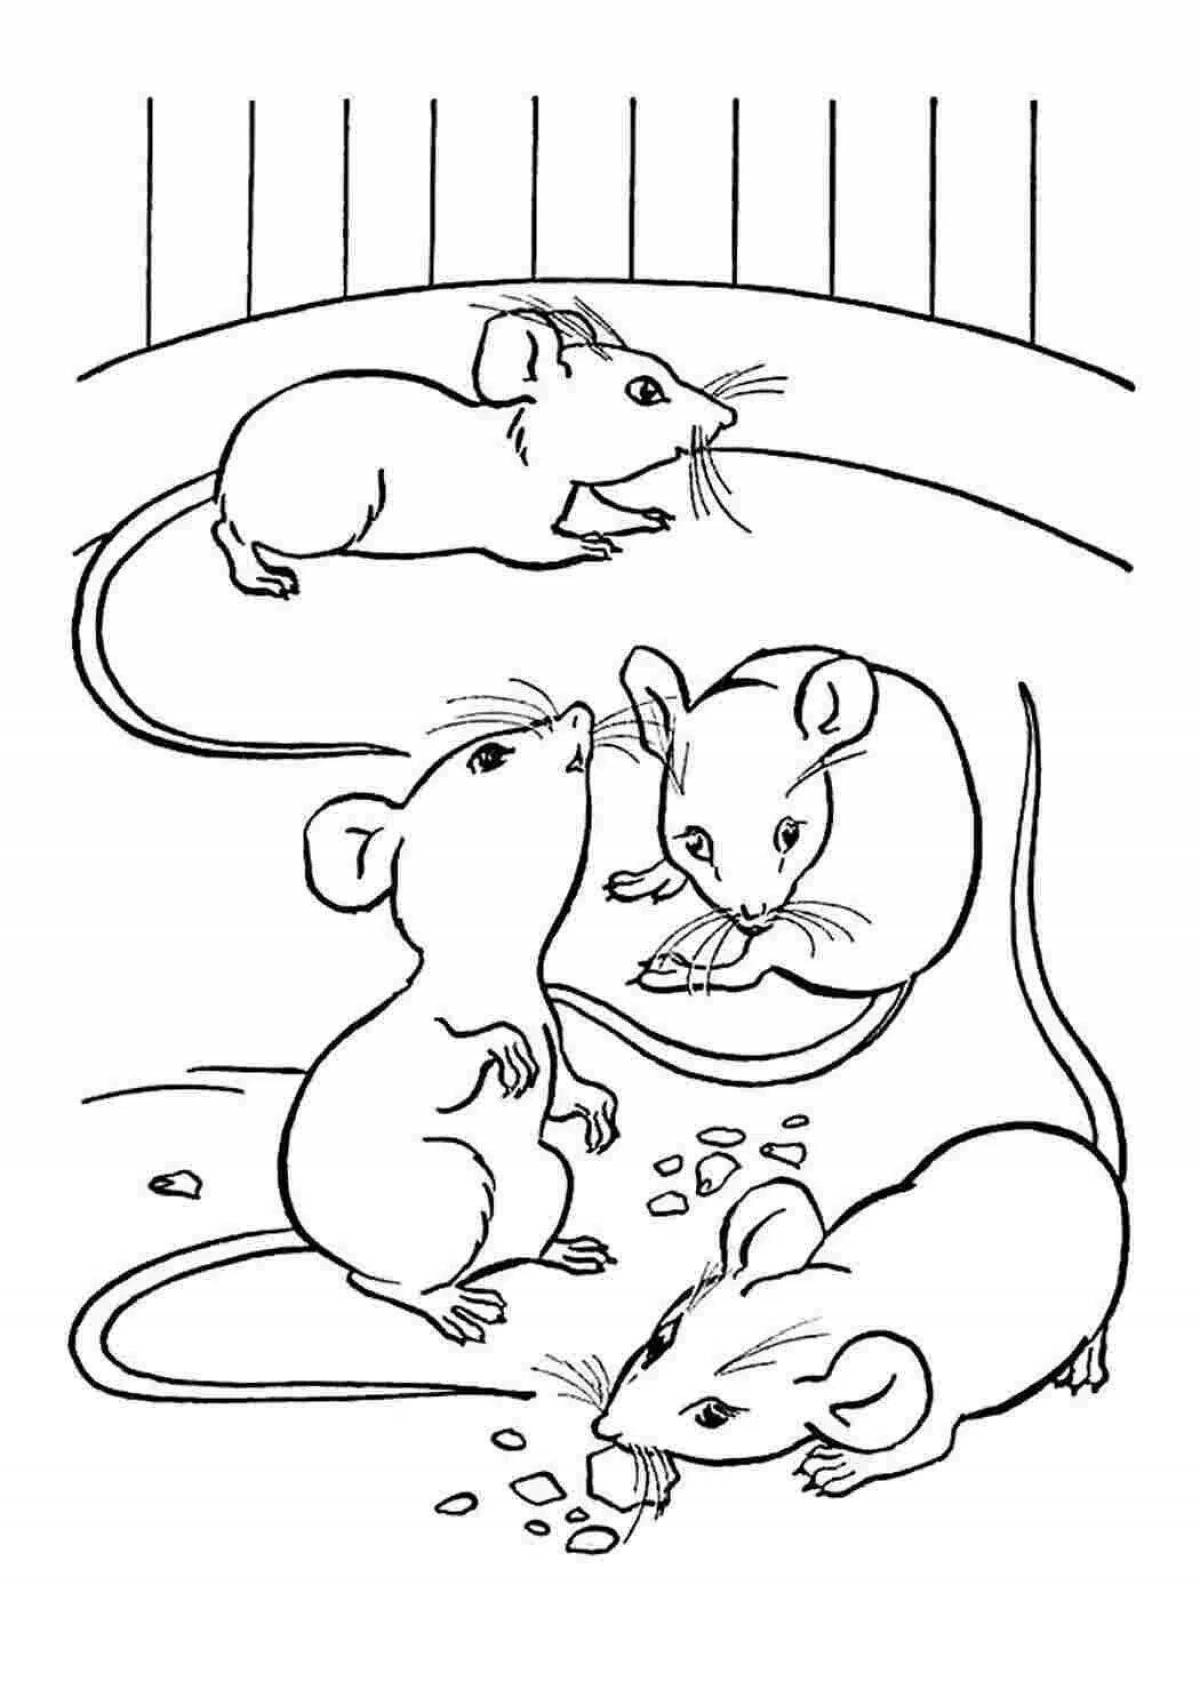 Intriguing rodent coloring page